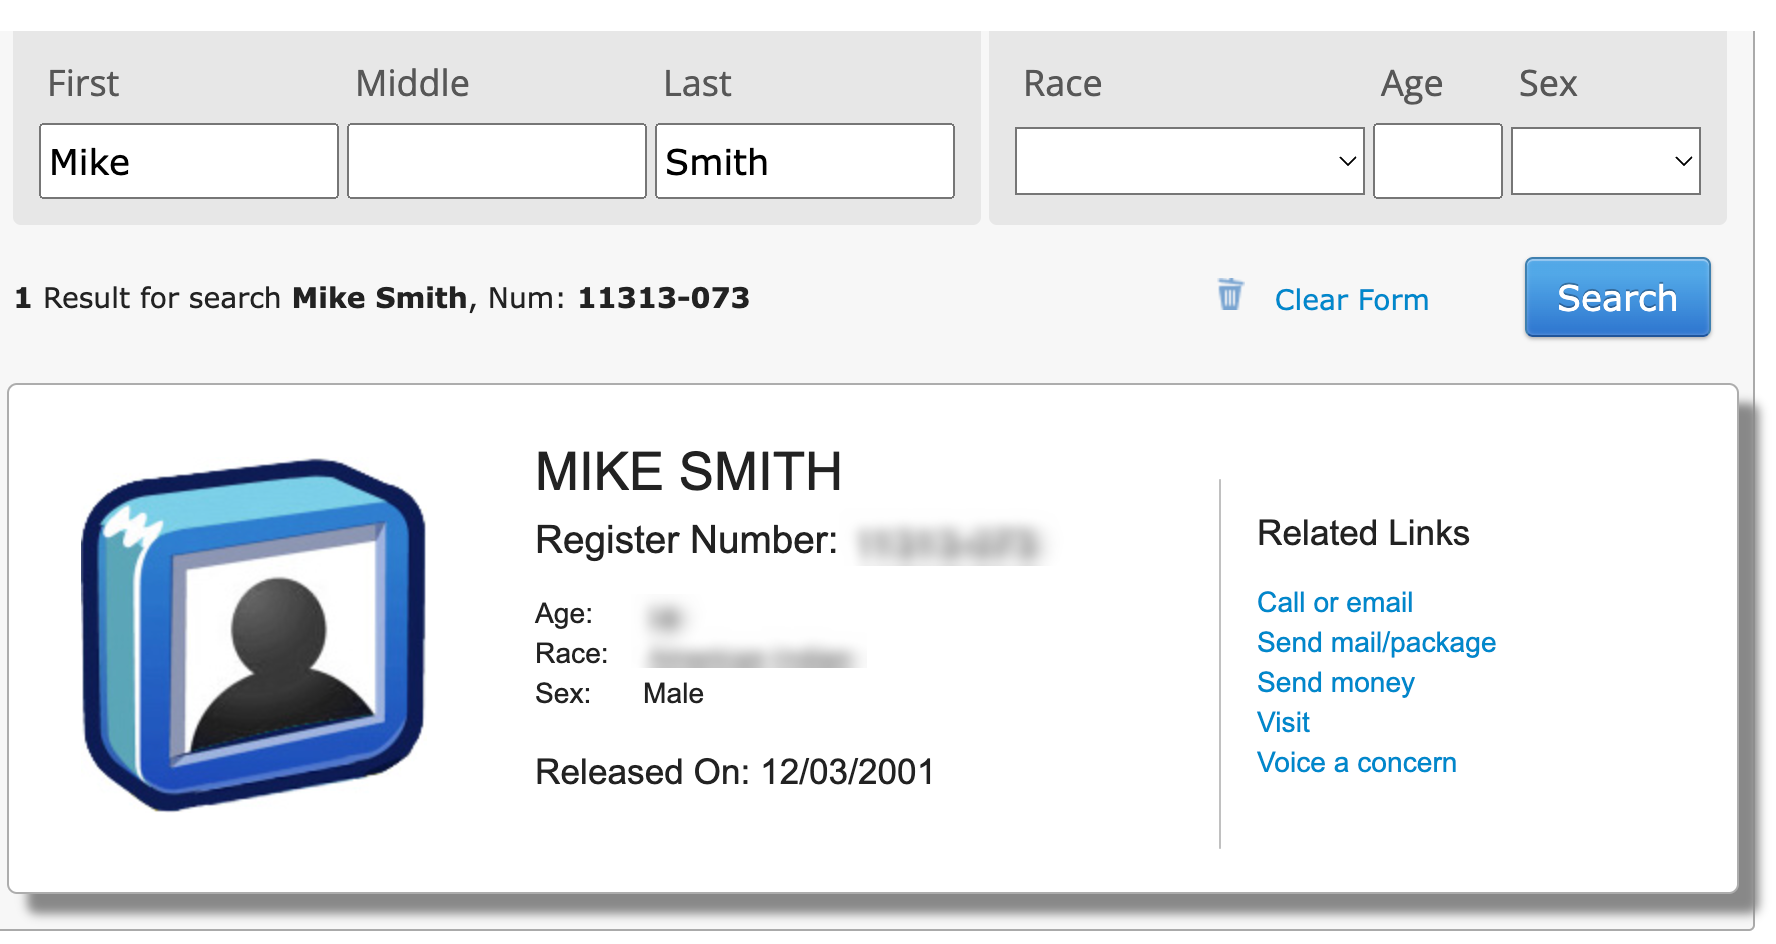 A search results page for Mike Smith includes details like name, register number, age, sex, and release date, along with related links such as "are mugshots public record," "call or email," "send mail/package," "send money," "visit," and "voice a concern.